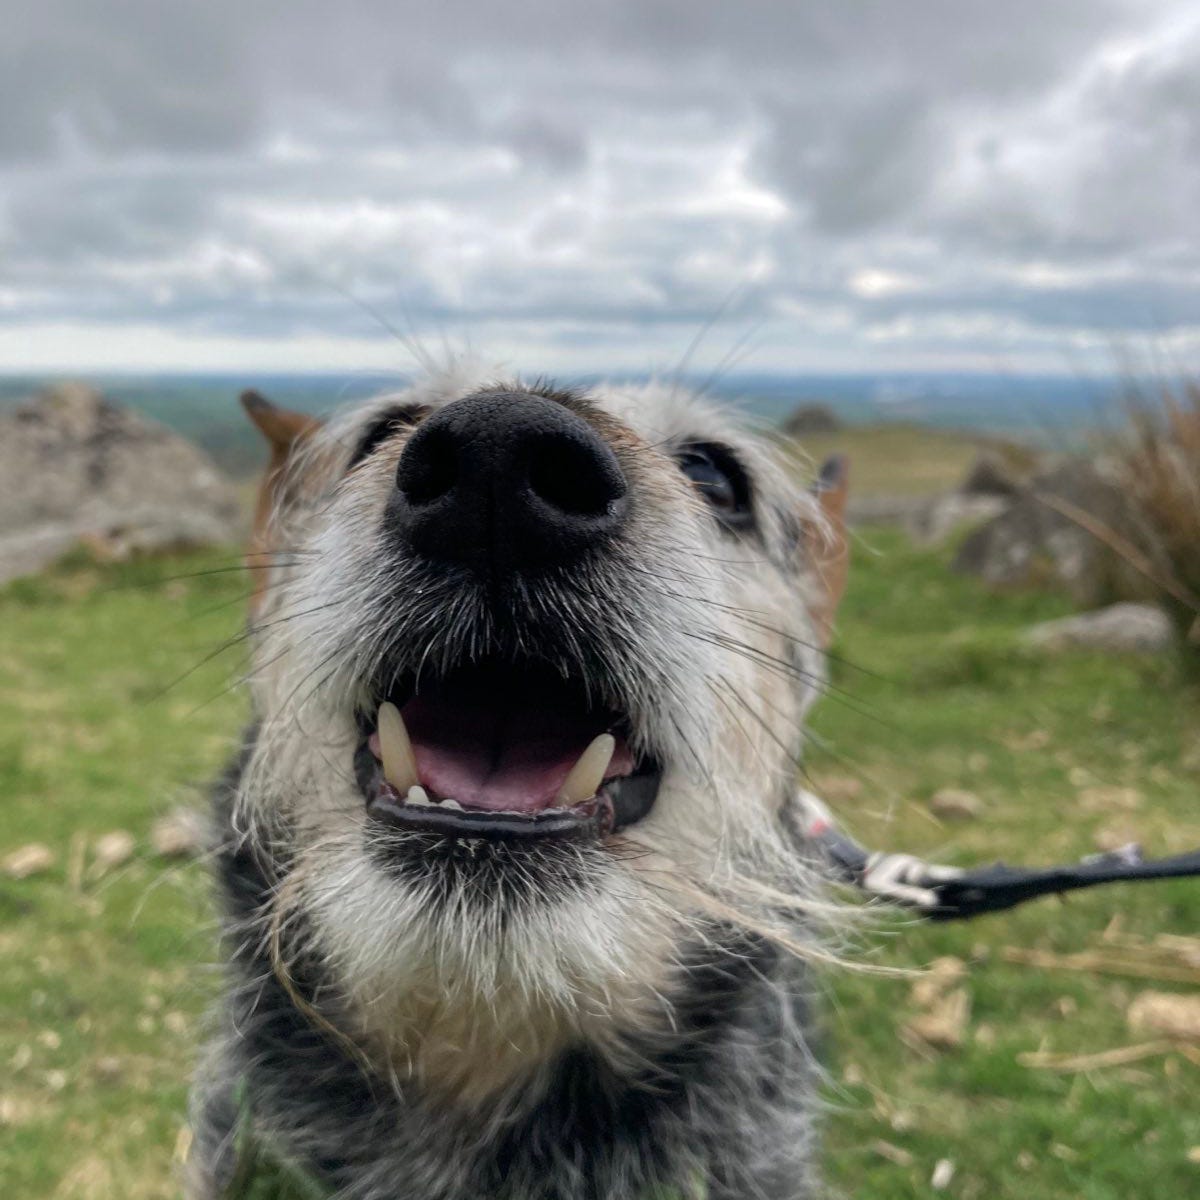 Image description: Jack, a scruffy black and tan terrier has his face right in the camera, mouth open expectantly. Behind him is a Dartmoor landscape on a grey day, with green grass and grey rocks visible beneath a cloudy sky.